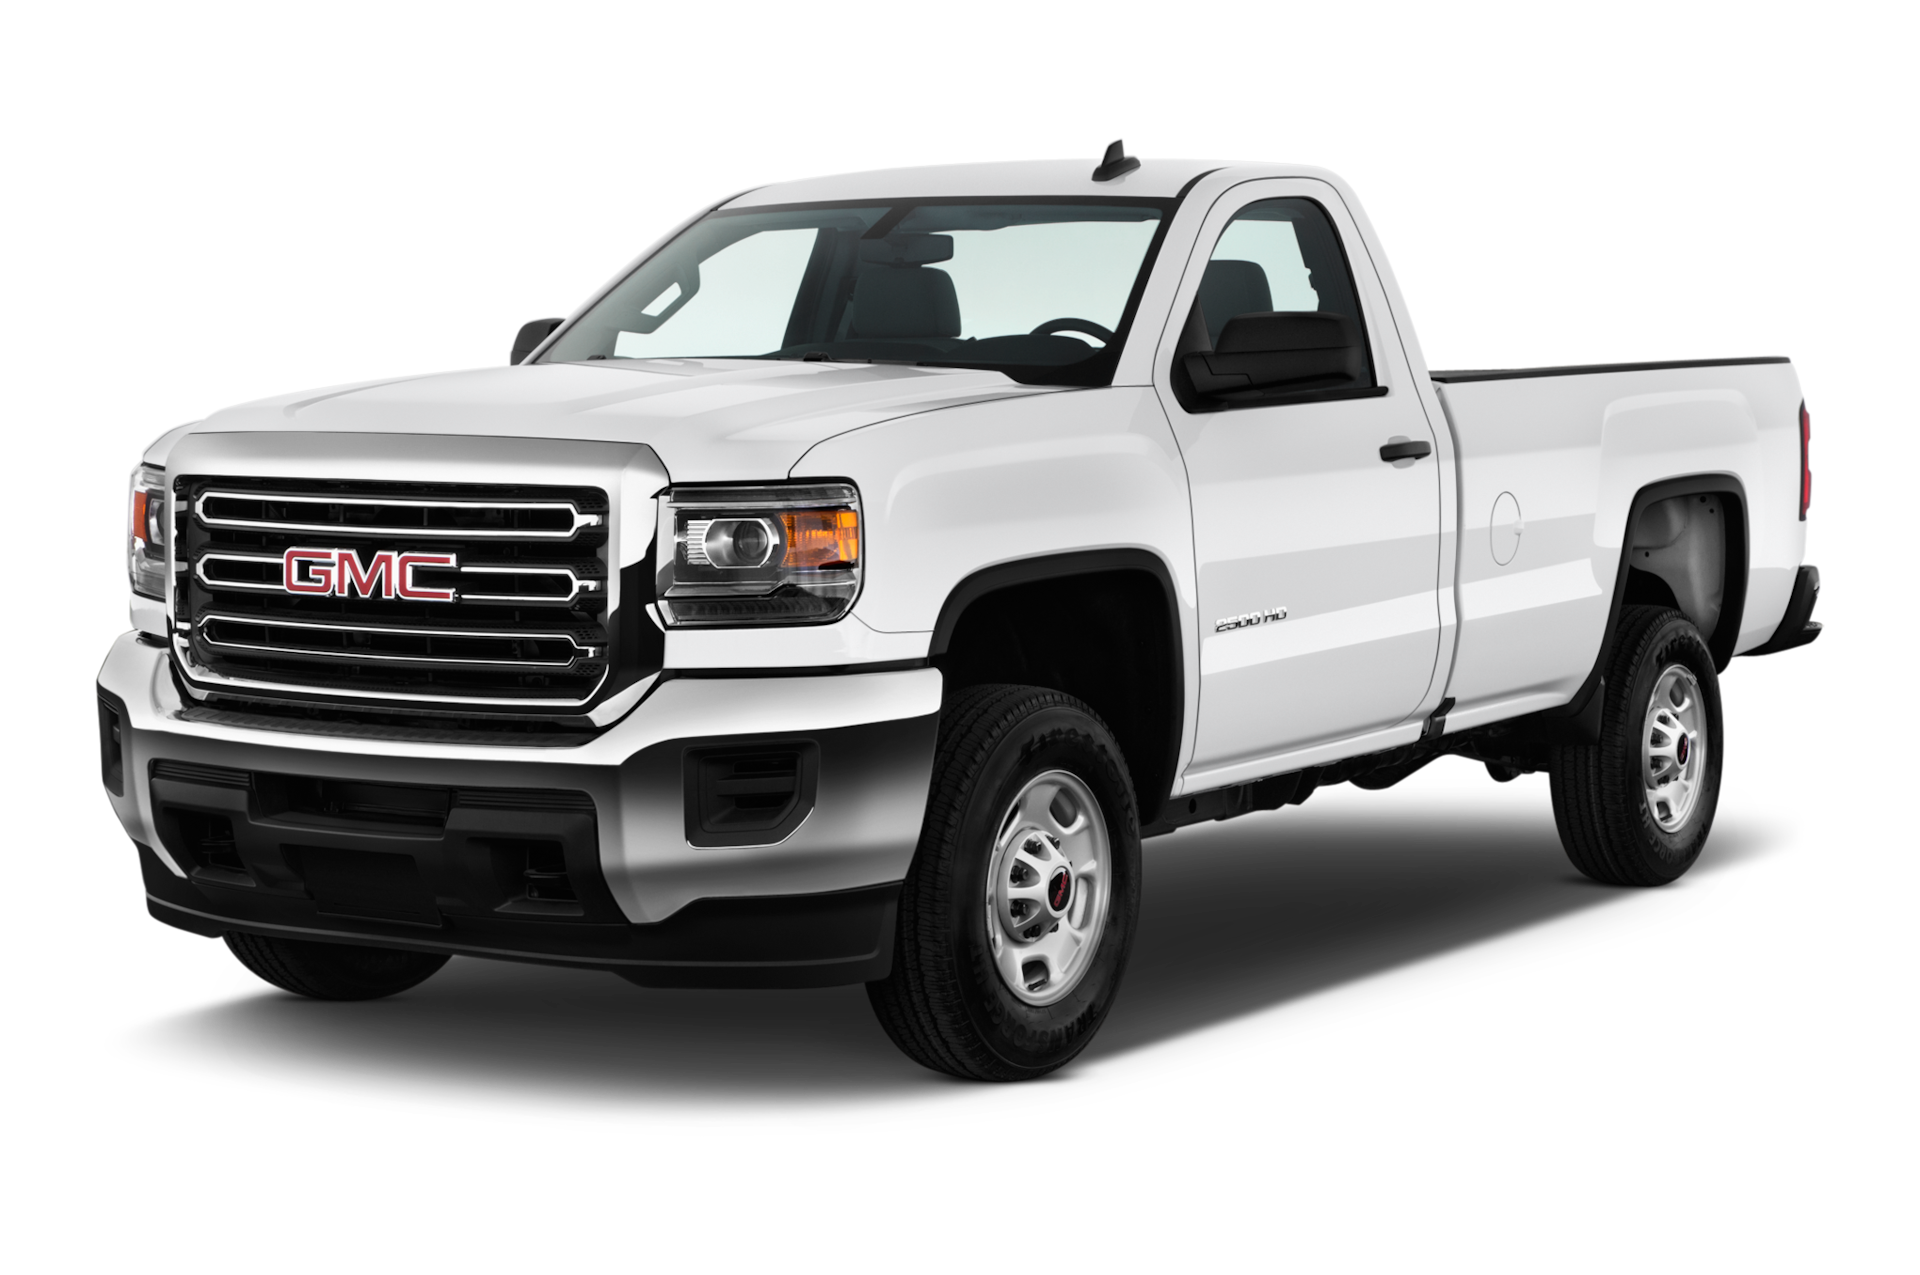 2016 GMC Sierra 2500HD Prices, Reviews, and Photos - MotorTrend